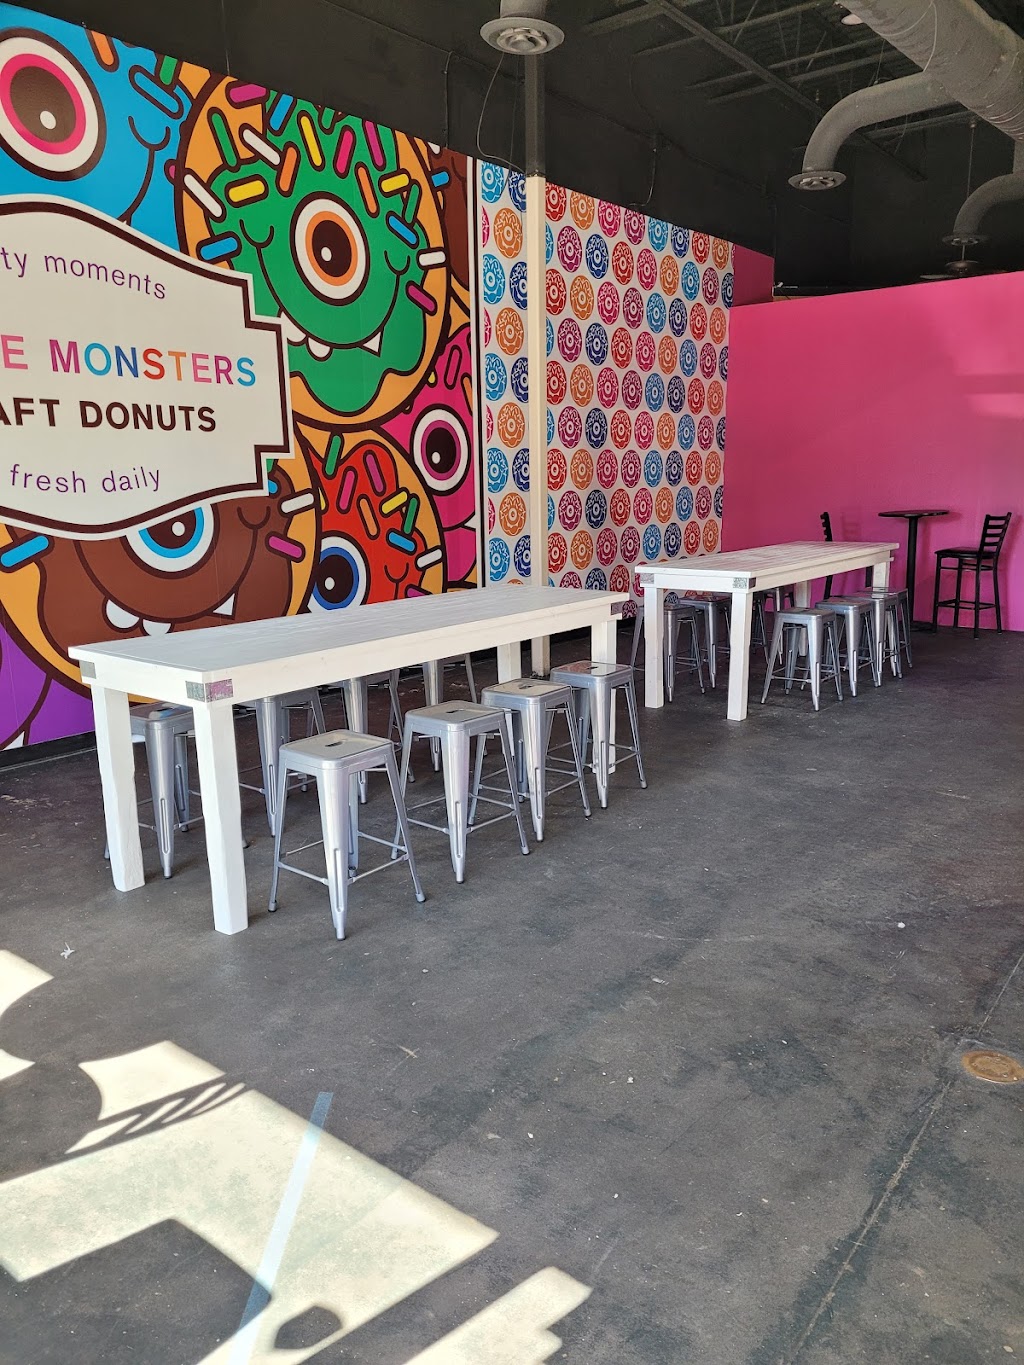 Giggle Monsters Craft Donuts Bells Ferry | 10511 Bells Ferry Rd #300, Canton, GA 30114, USA | Phone: (678) 880-6504